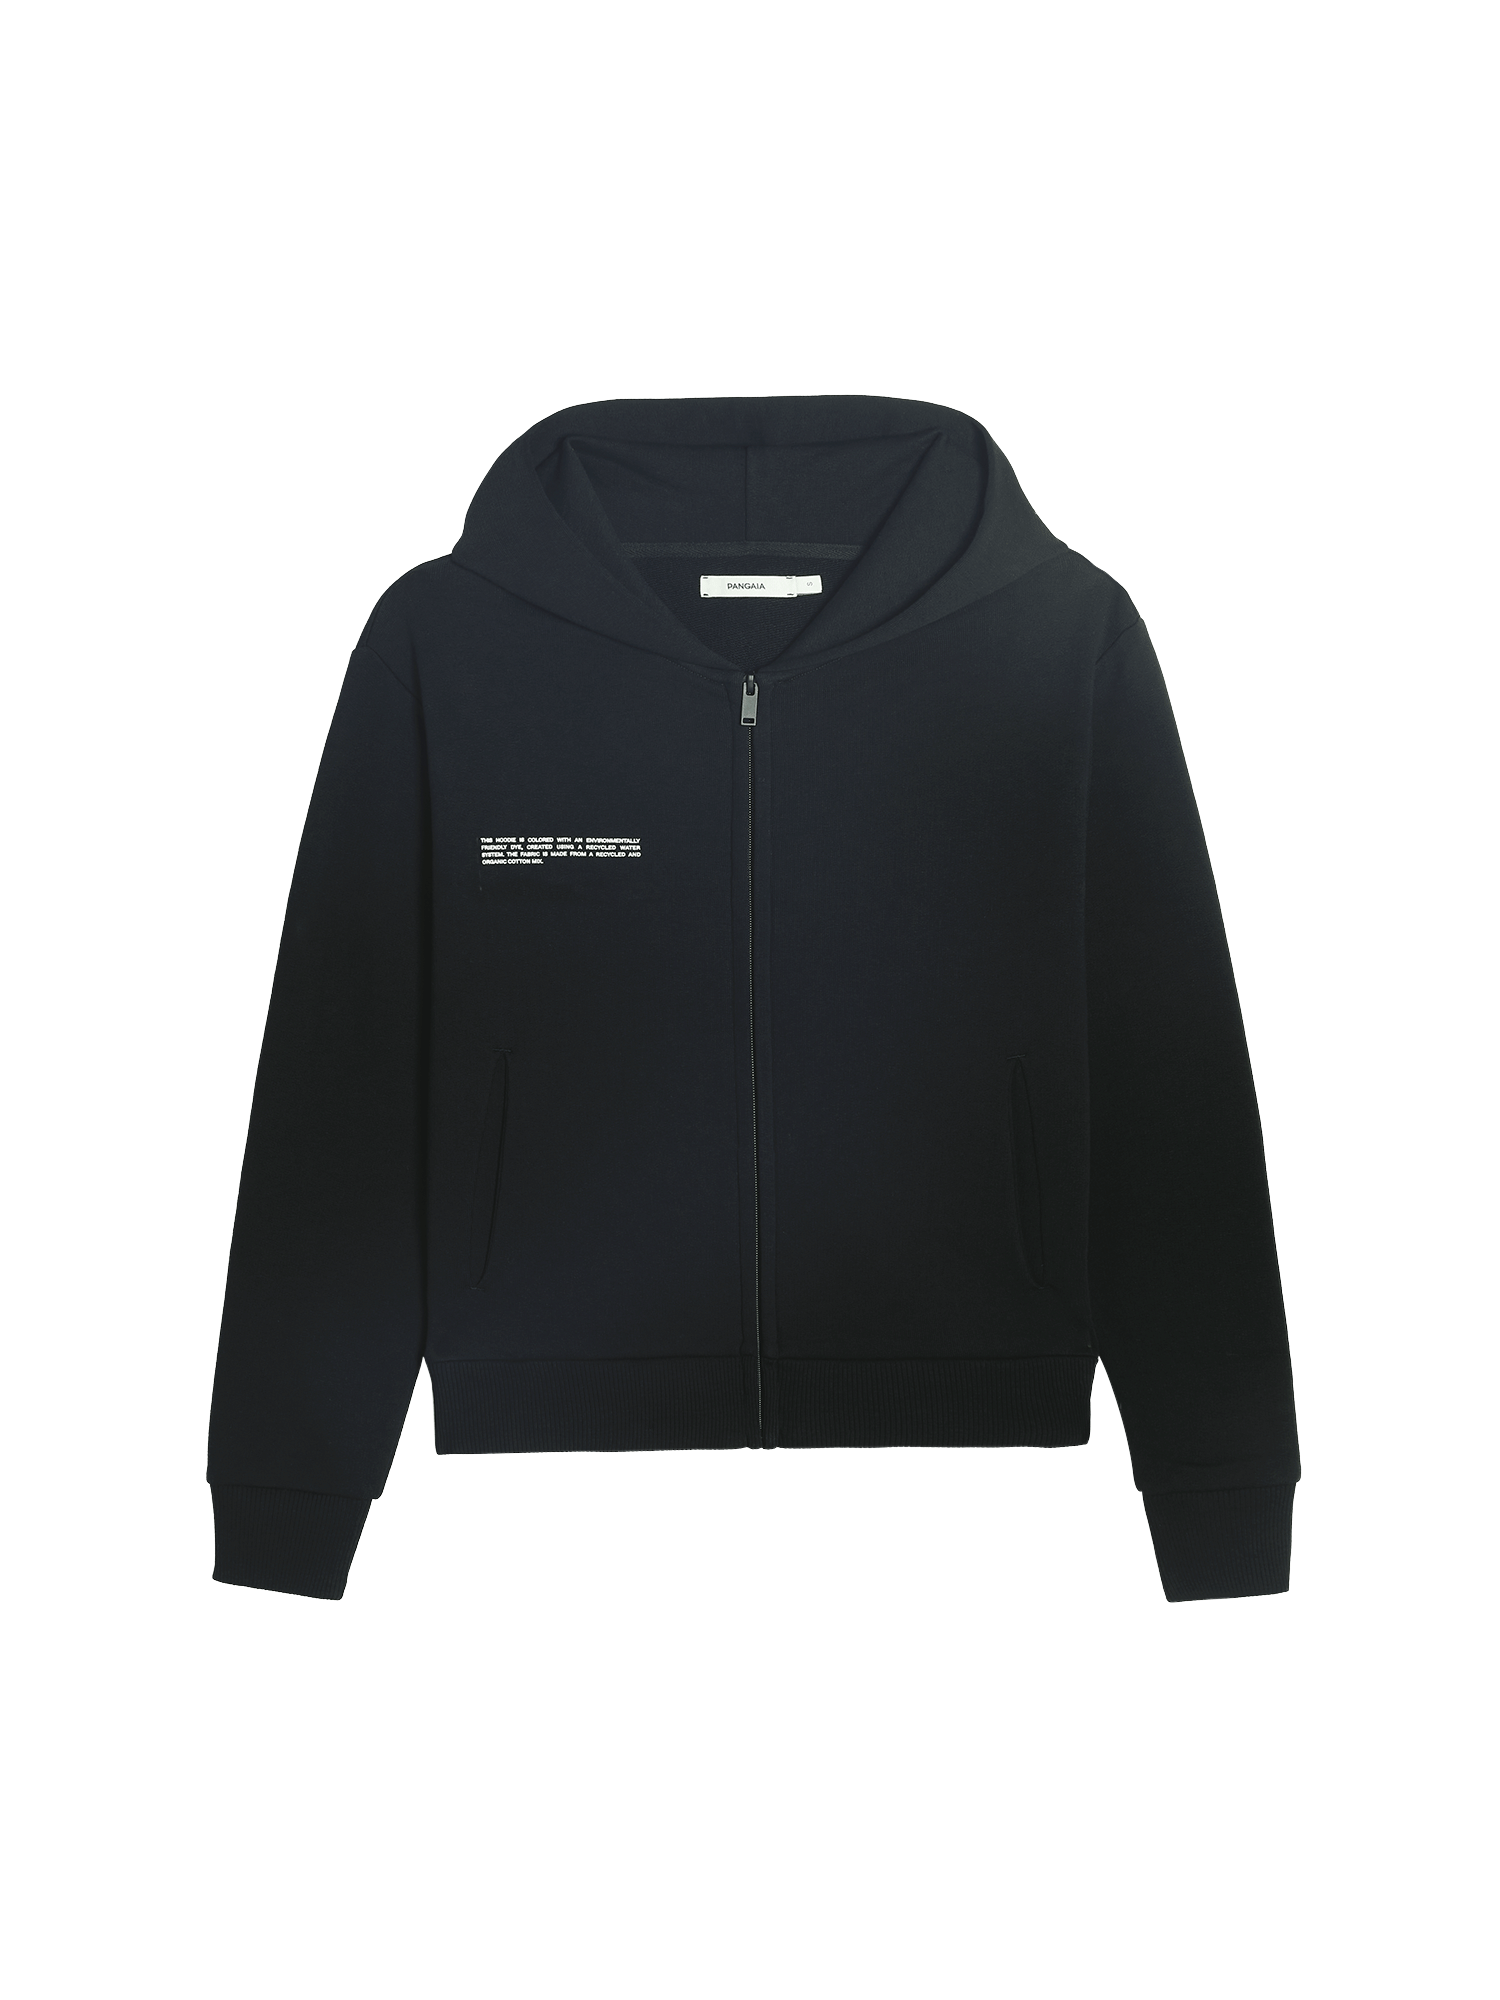 https://storage.googleapis.com/download/storage/v1/b/whering.appspot.com/o/marketplace_product_images%2Fpangaia-archive-lightweight-recycled-cotton-zipped-hoodieblack-navy-craL5pihRKVGdVt8N9SUUd.png?generation=1691730054164181&alt=media